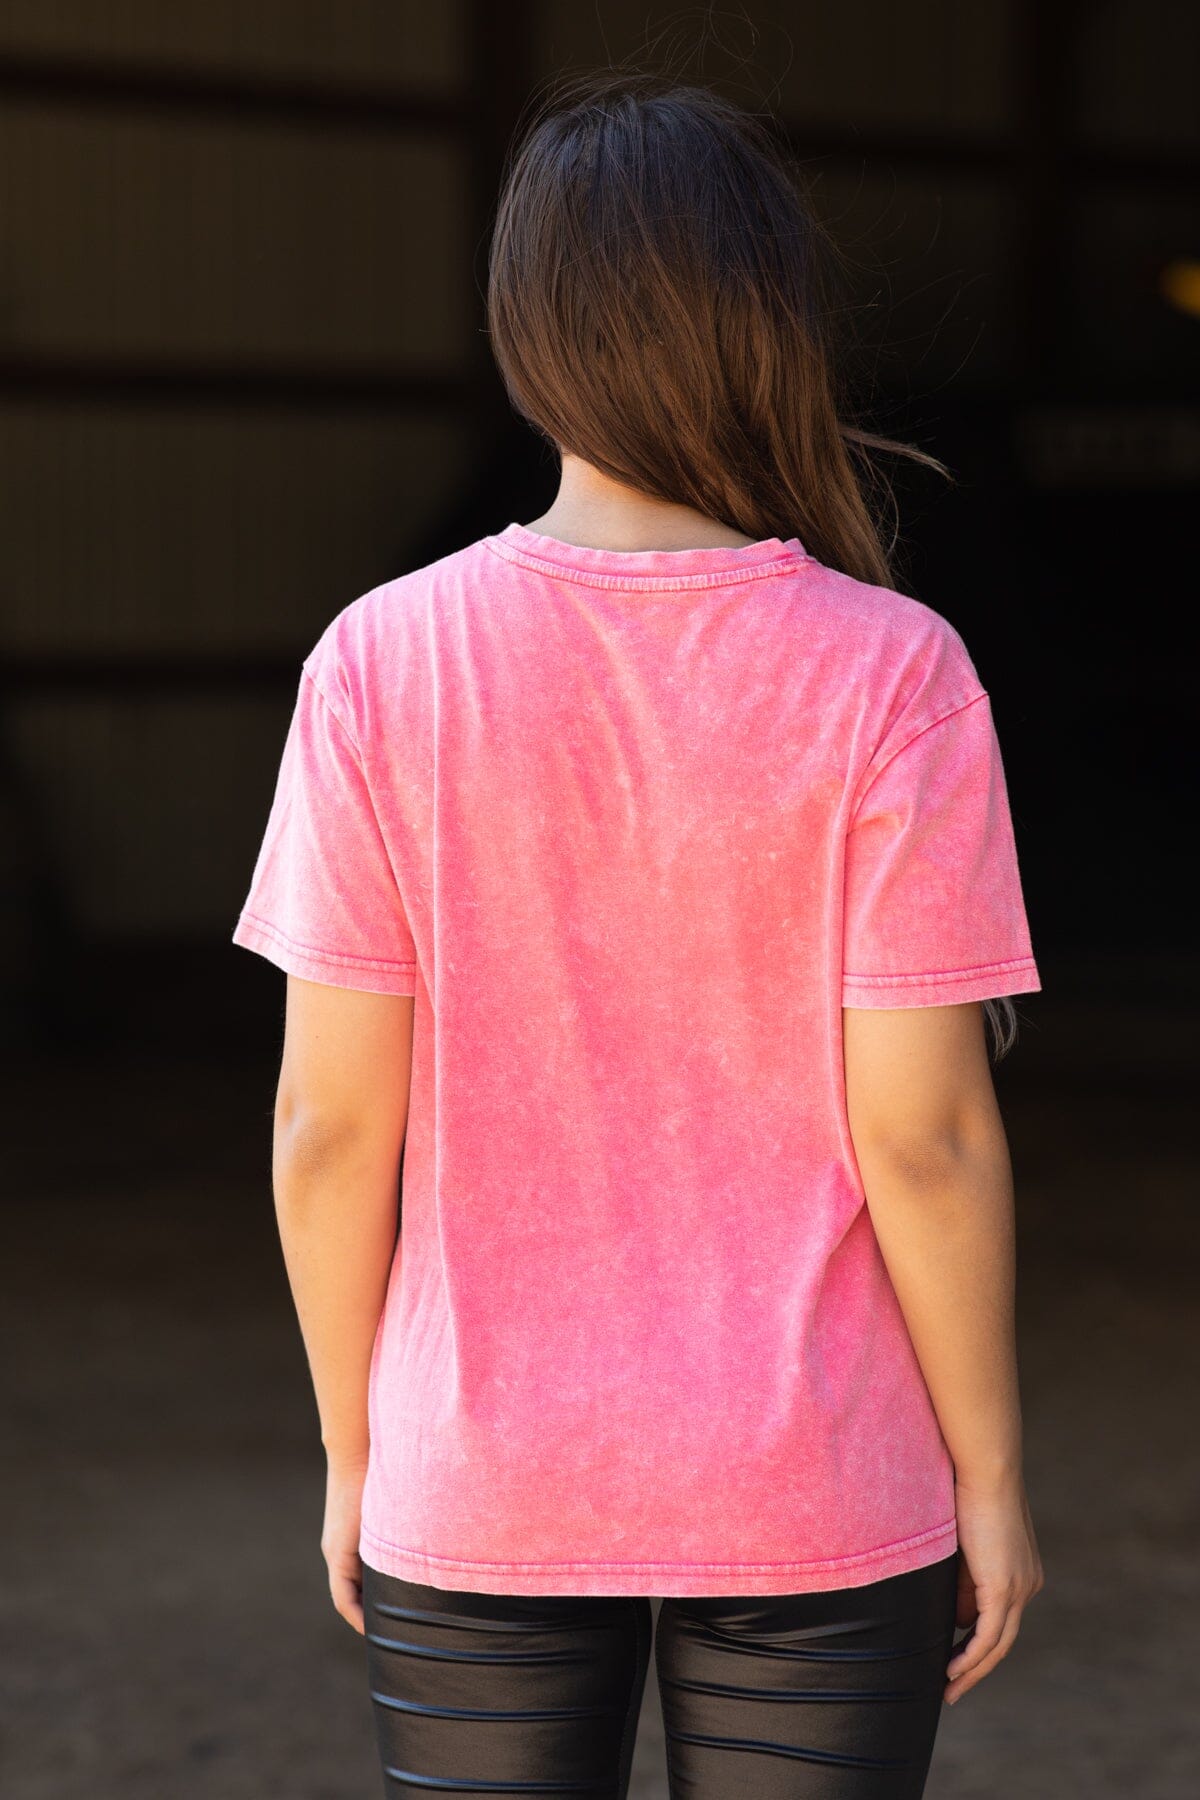 Pink Nashville Country Music Graphic Tee - Filly Flair